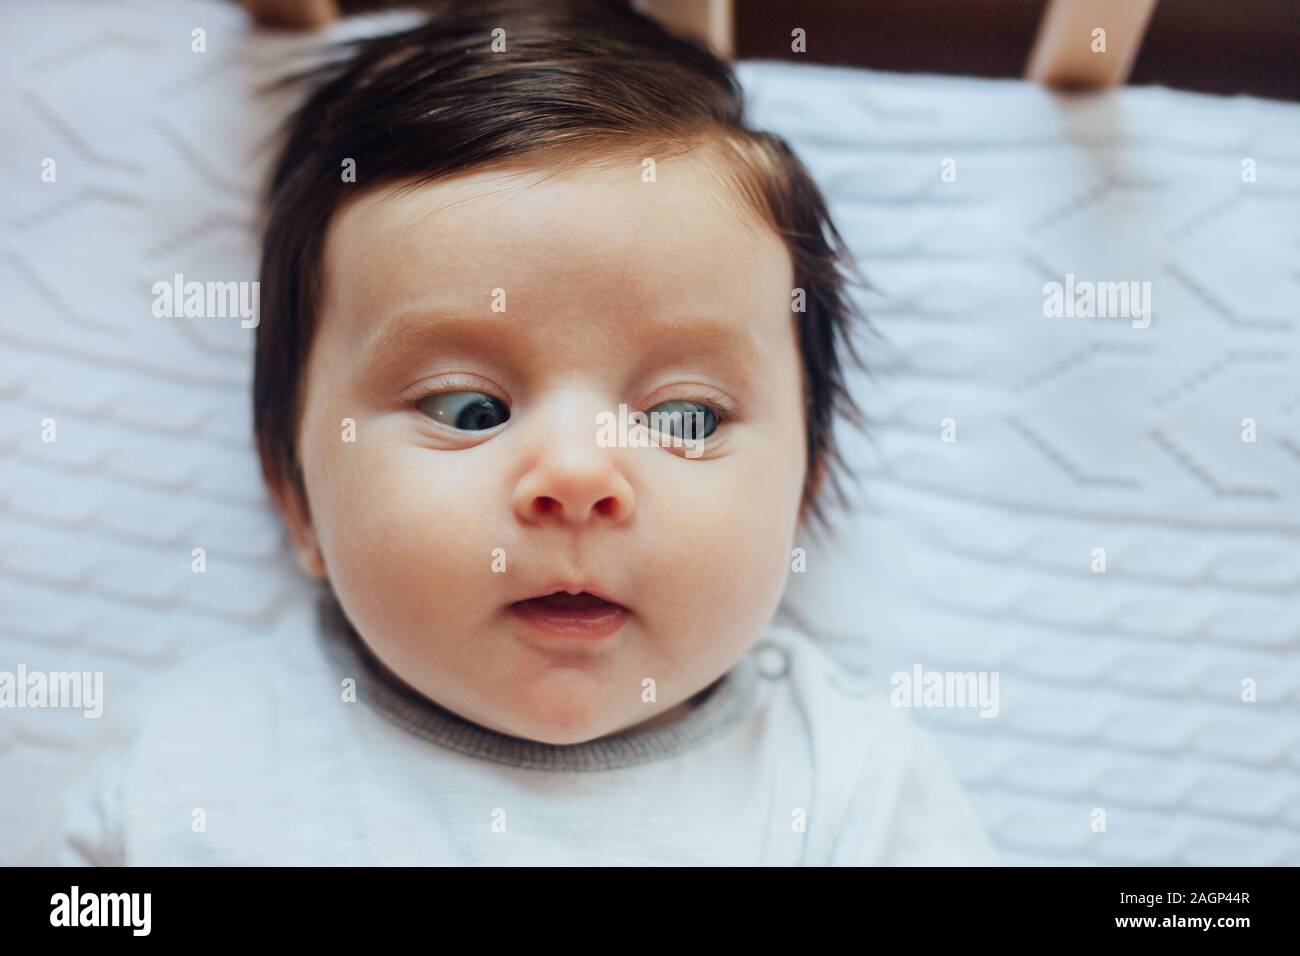 Surprised funny cute baby with blues eyes close portrait, lying in bed Stock Photo